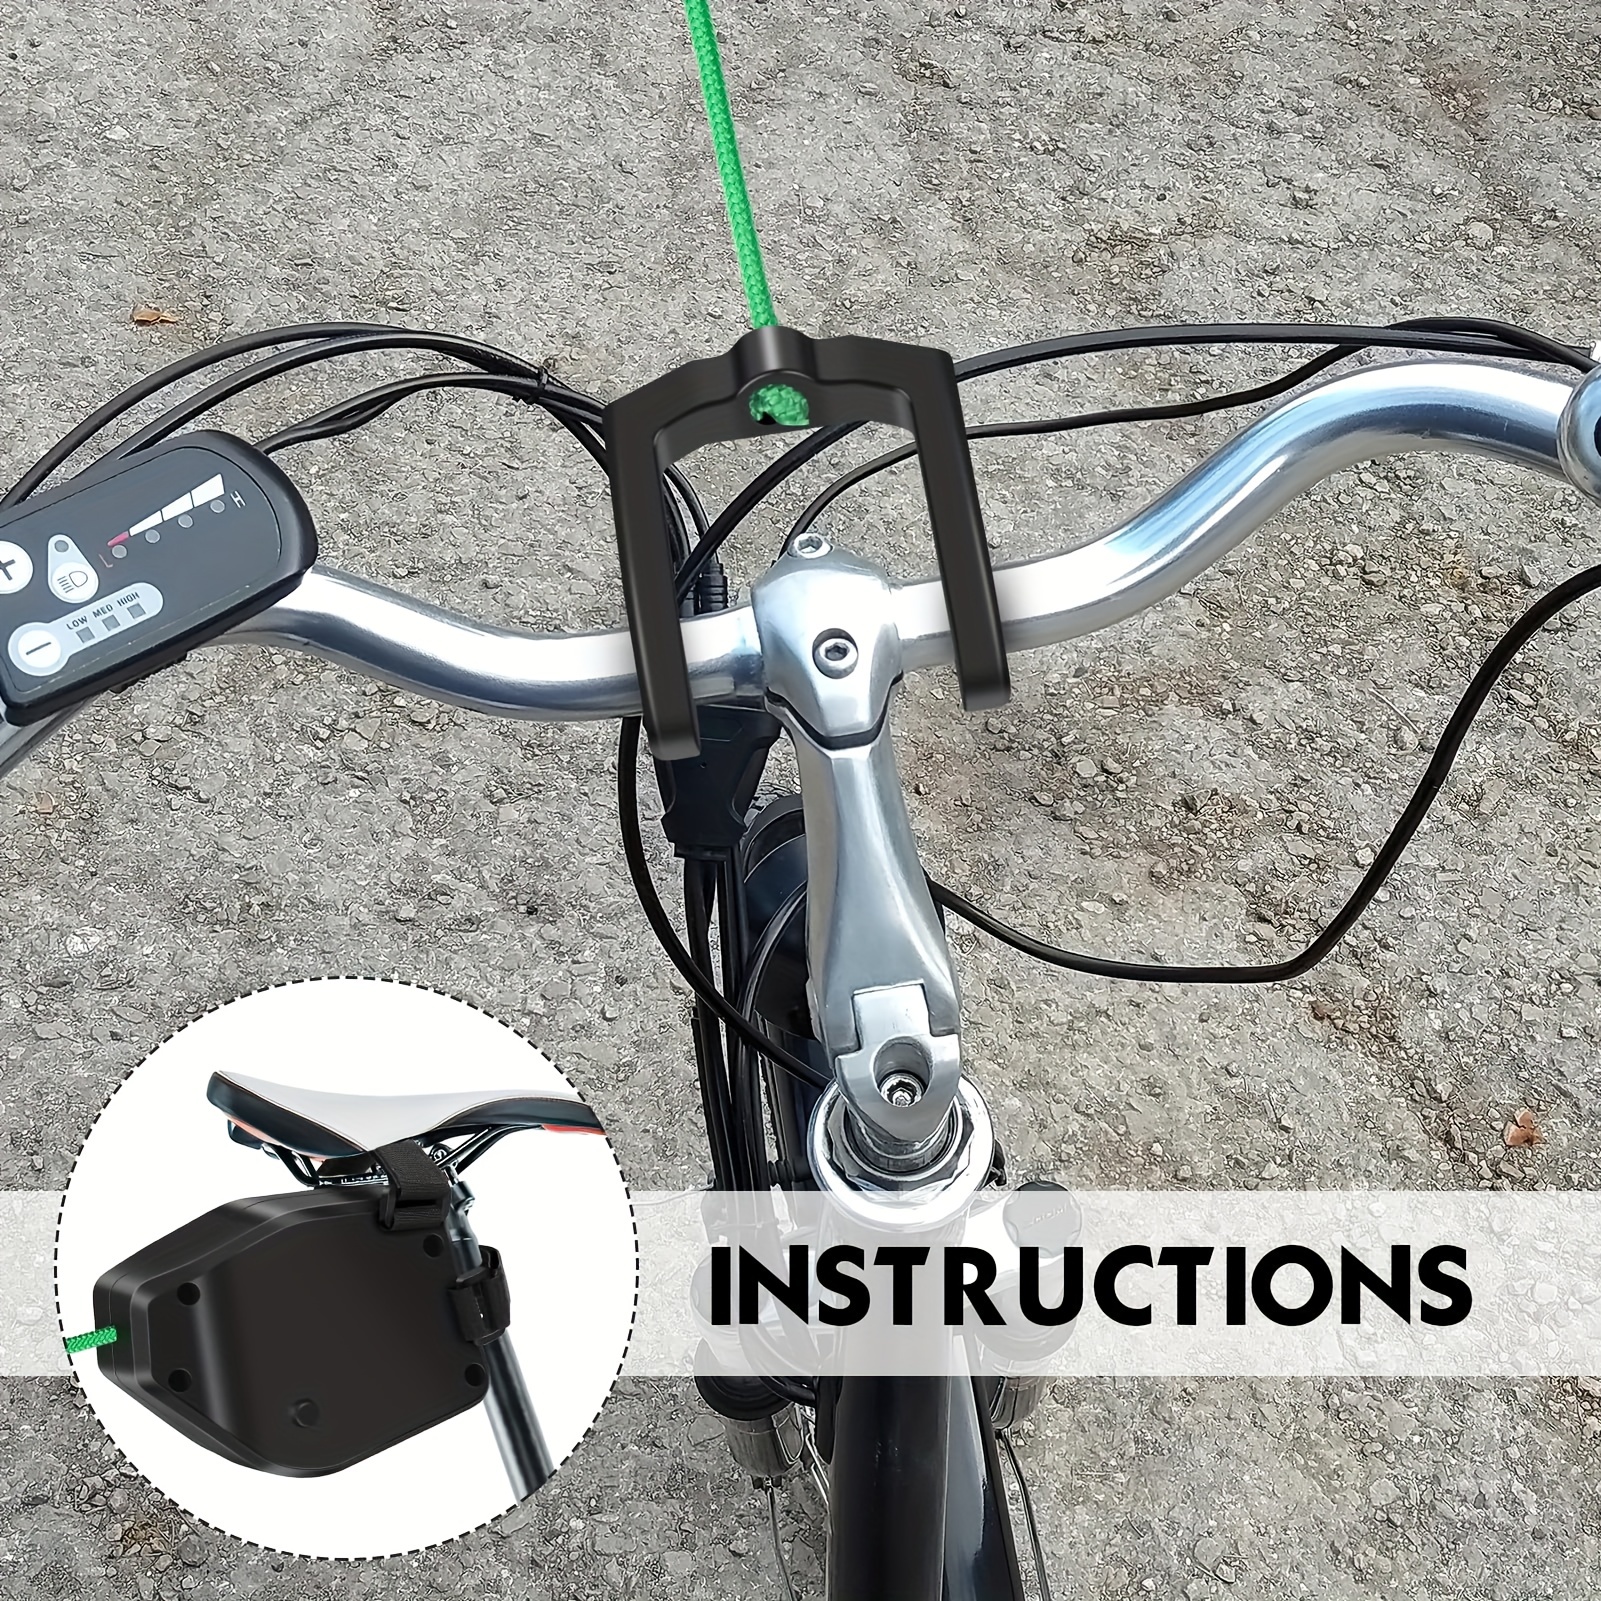 Children's Bicycle Tow Rope Retractable Bike Towing System Parent